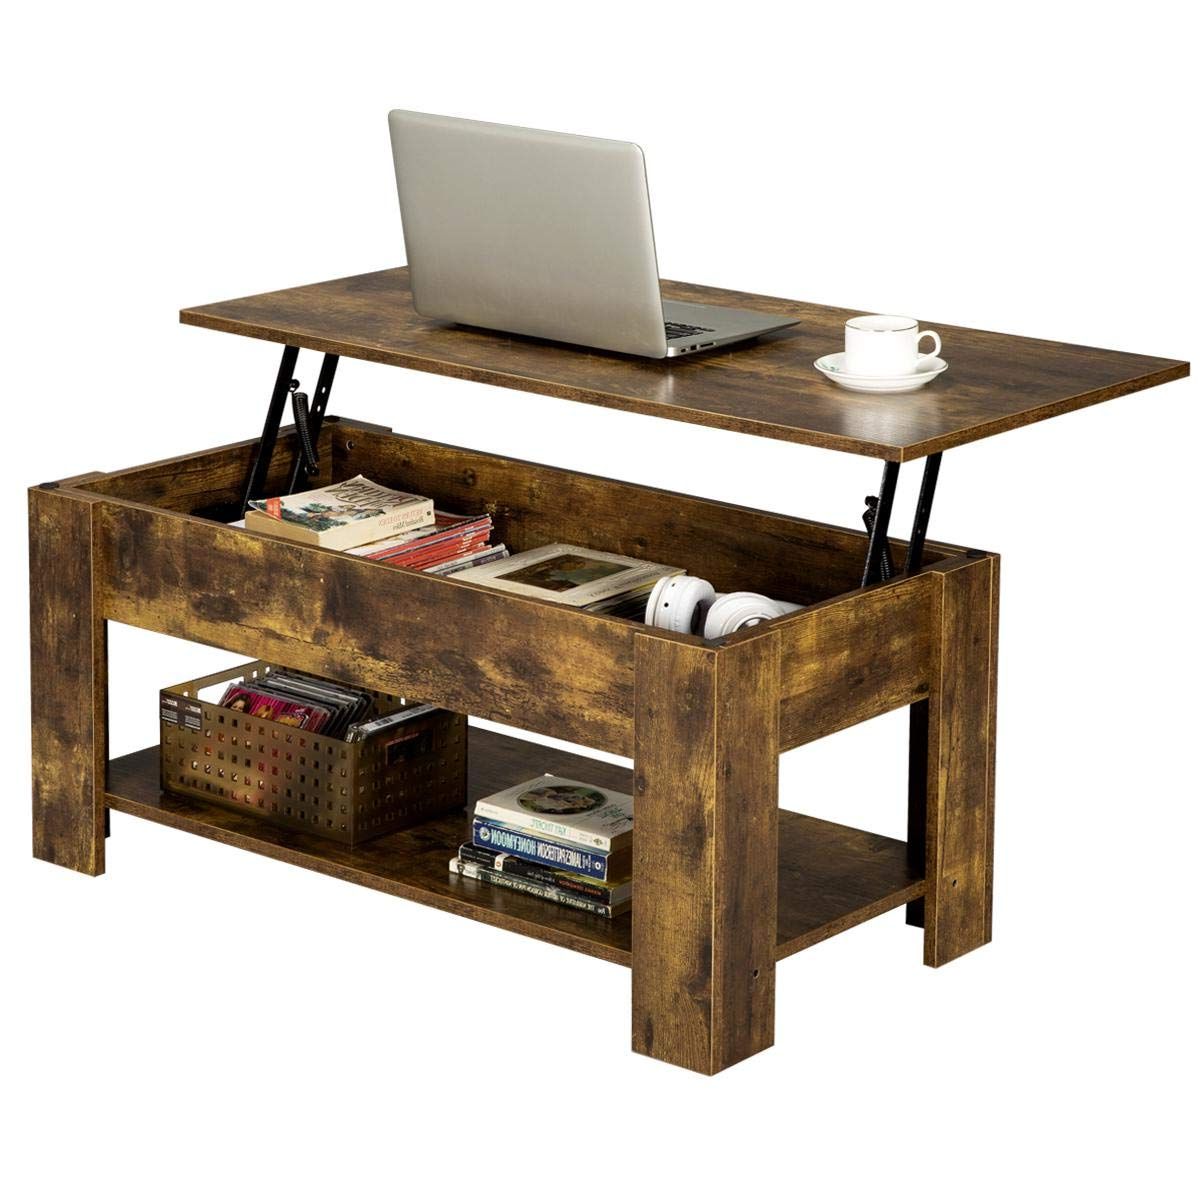 Yaheetech Rustic Lift Top Coffee Table W/hidden Compartment & Storage In Current Lift Top Coffee Tables With Hidden Storage Compartments (View 9 of 15)